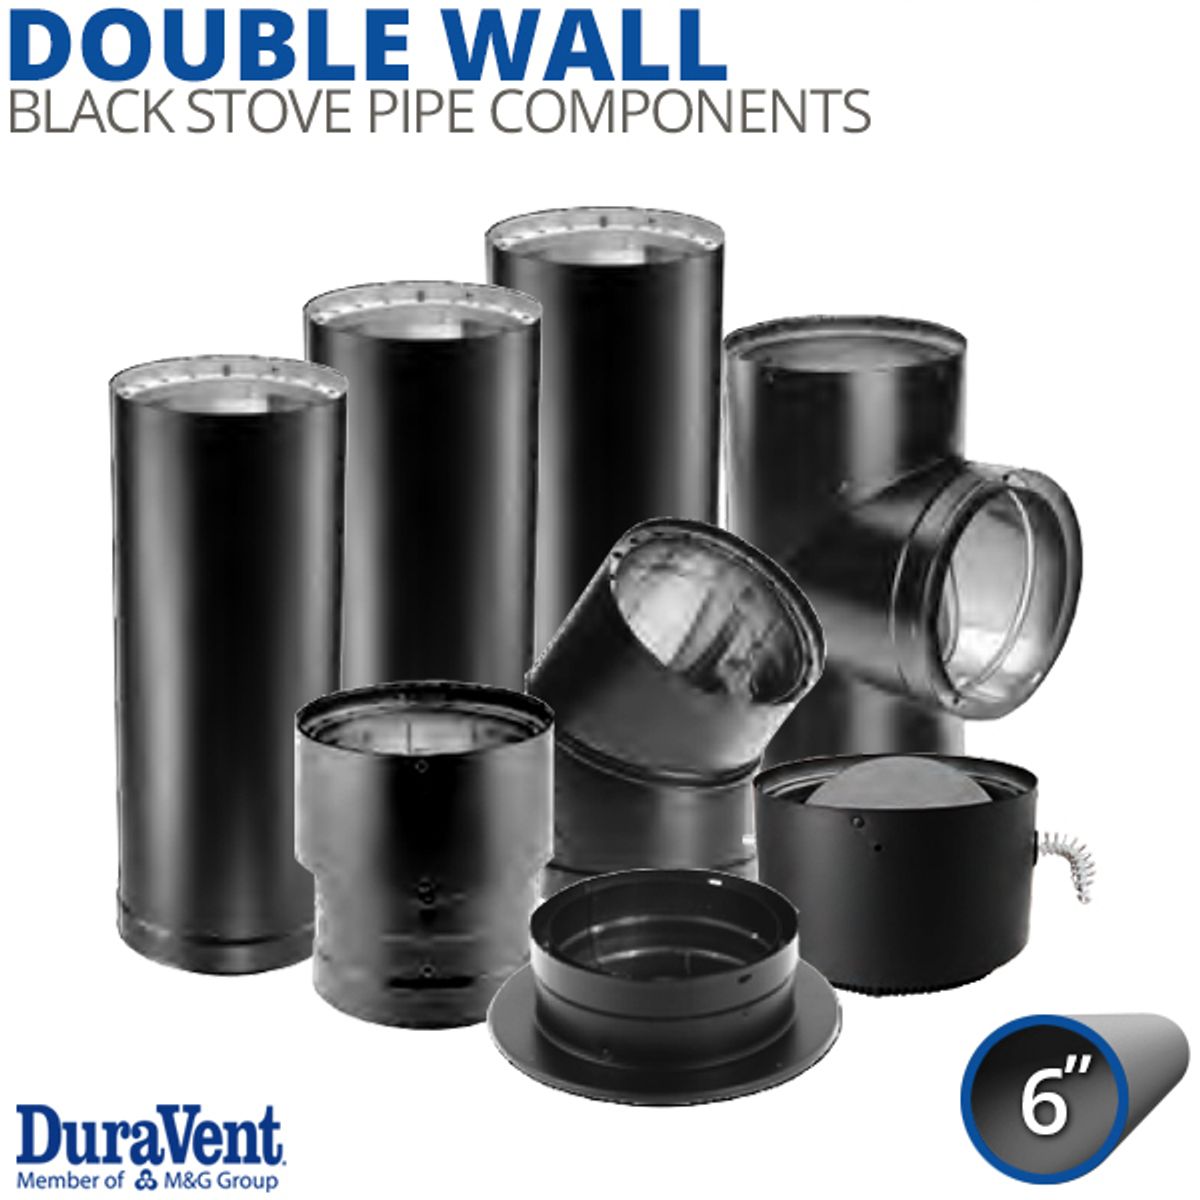 DuraTech 6 Inch Wood Stove Pipe Kits and Supplies